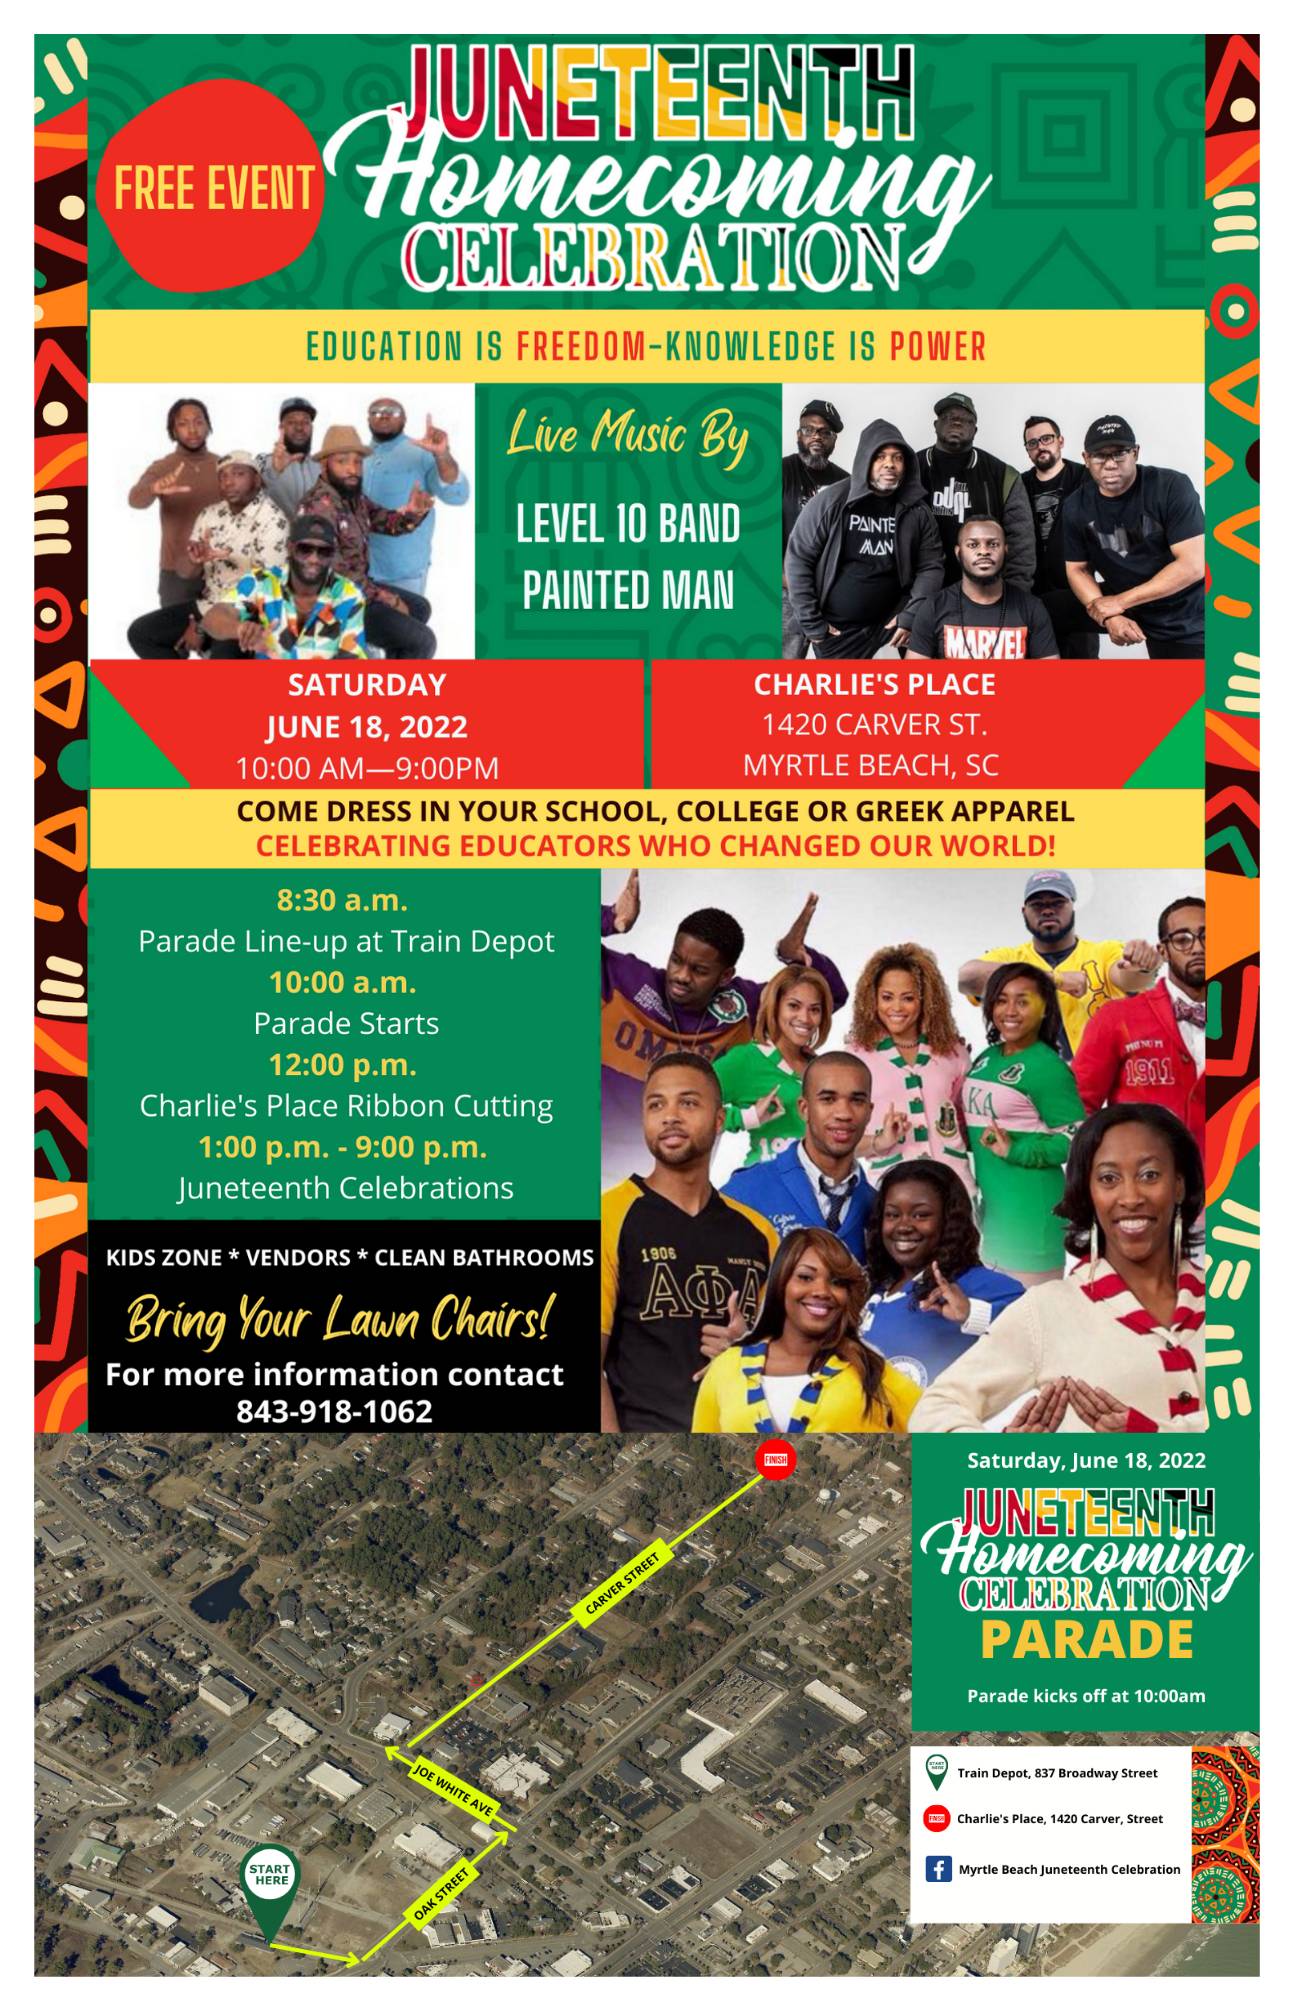 Juneteenth Flyer with Map and Parade Line up 6-6-2022 - Copy